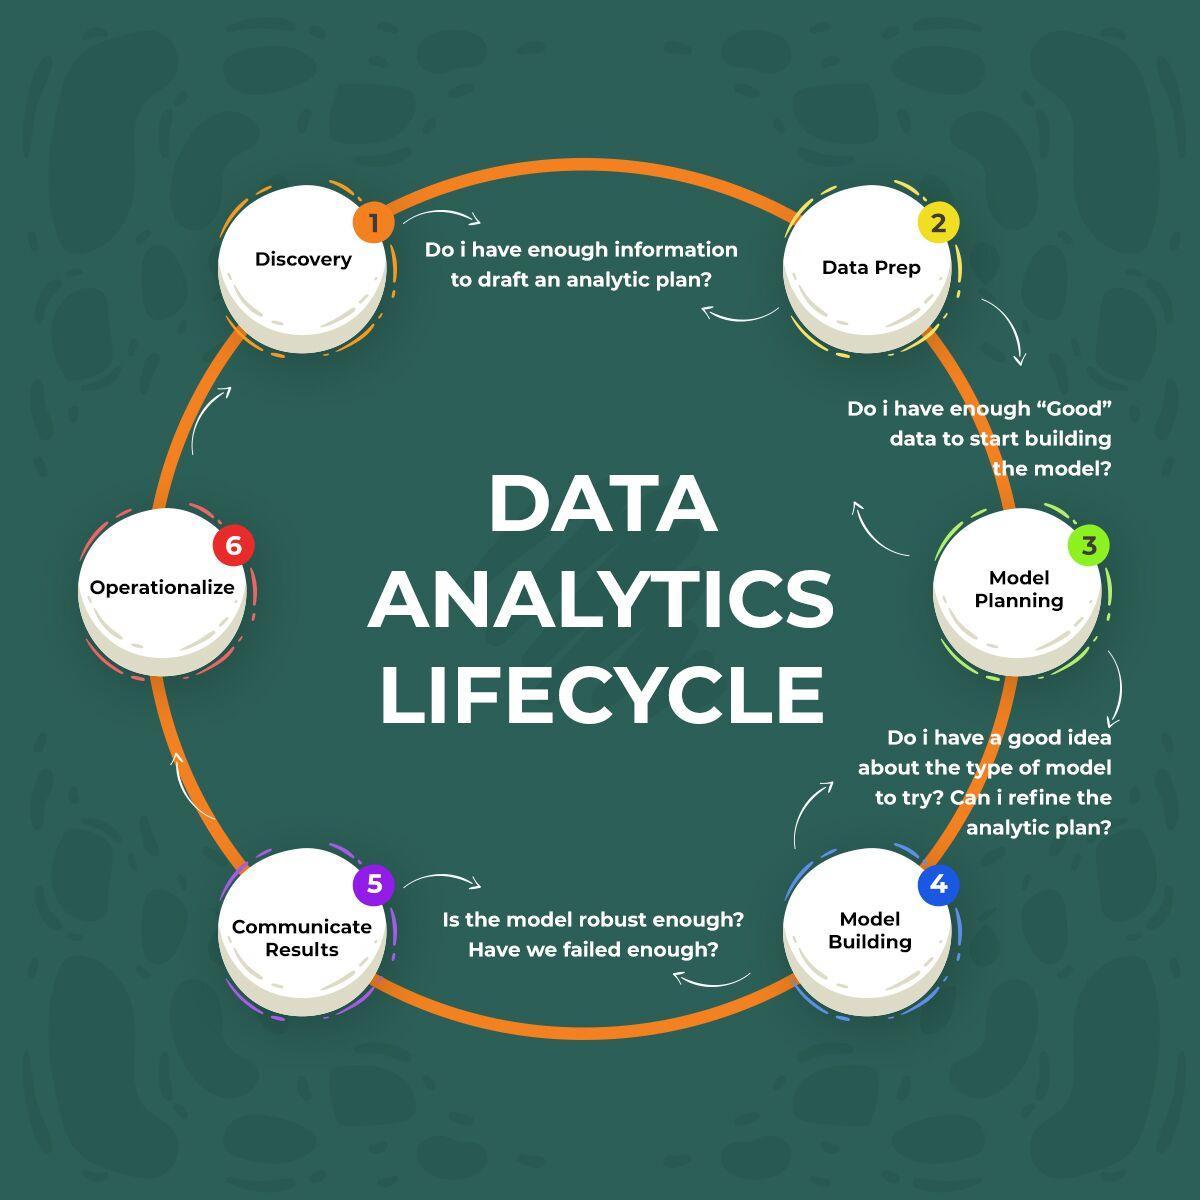 marketing research and data analysis